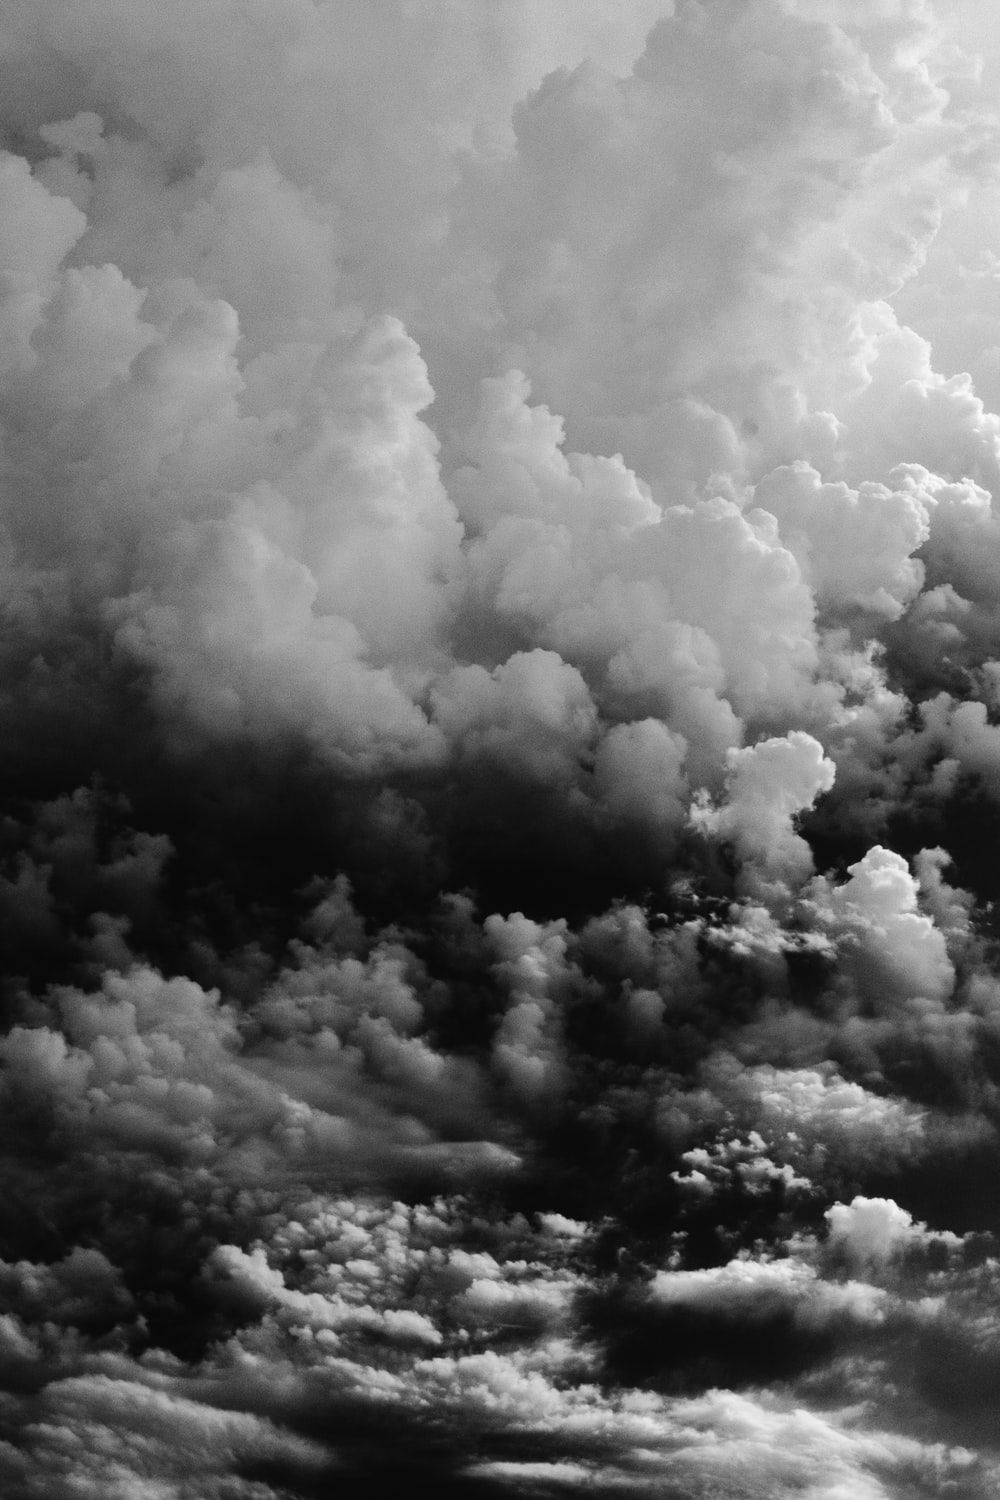 White Clouds Wallpapers